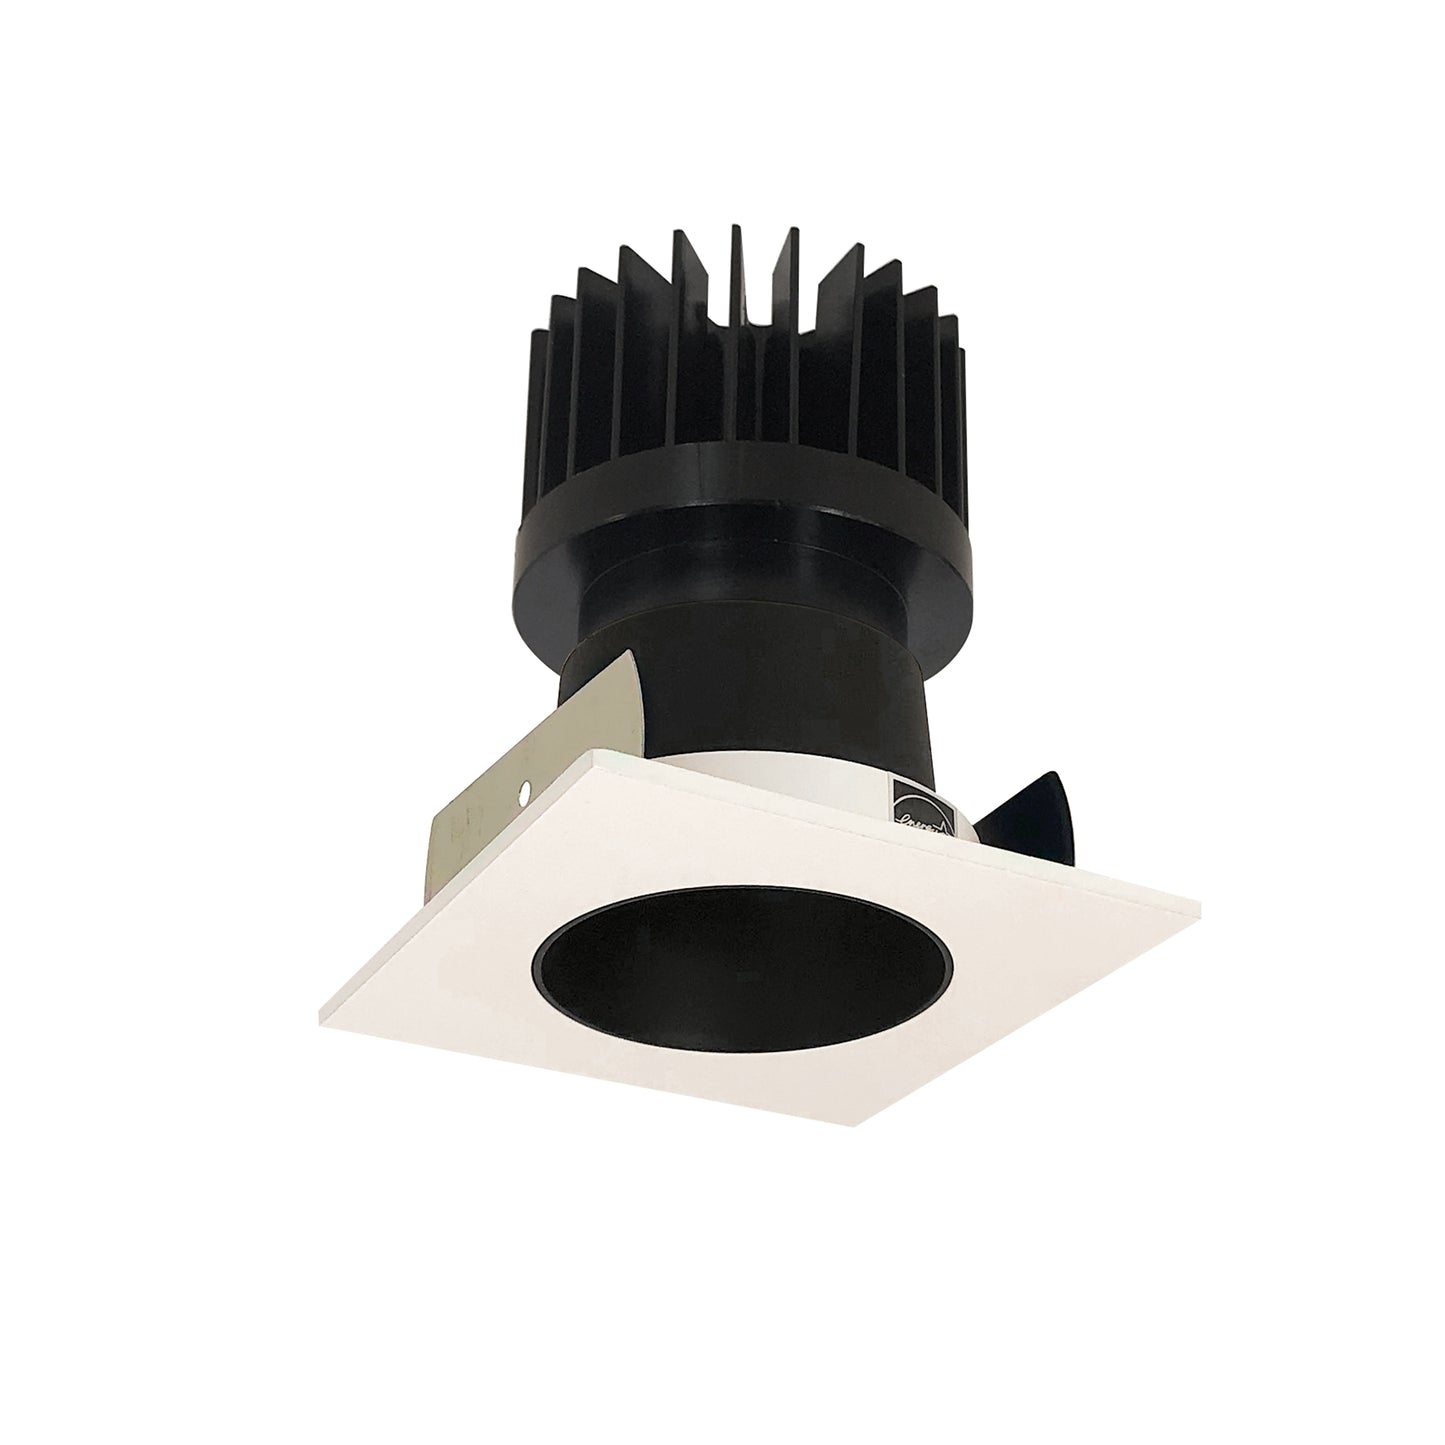 Nora Lighting 2" Iolite LED Square Reflector with Round Aperture, 1500lm/2000lm/2500lm (varies by housing), 2700K, Black Reflector / White Flange NIOB-2SNDC27XBW/HL